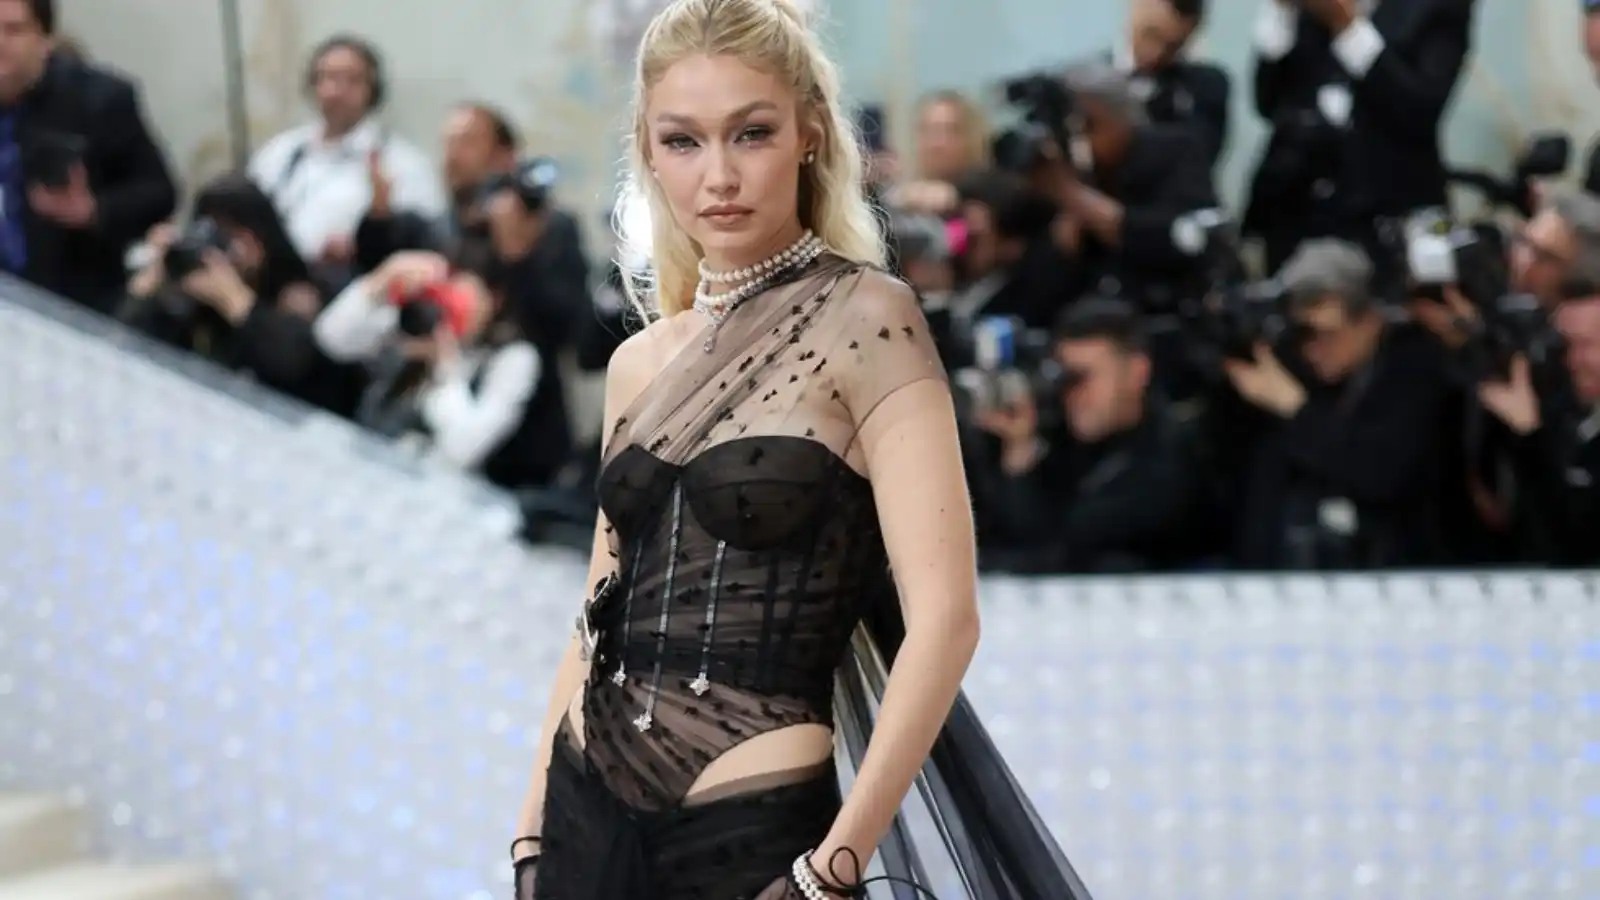 The top model Gigi Hadid was never gone wrong in her fashion choices including Met Gala 2023